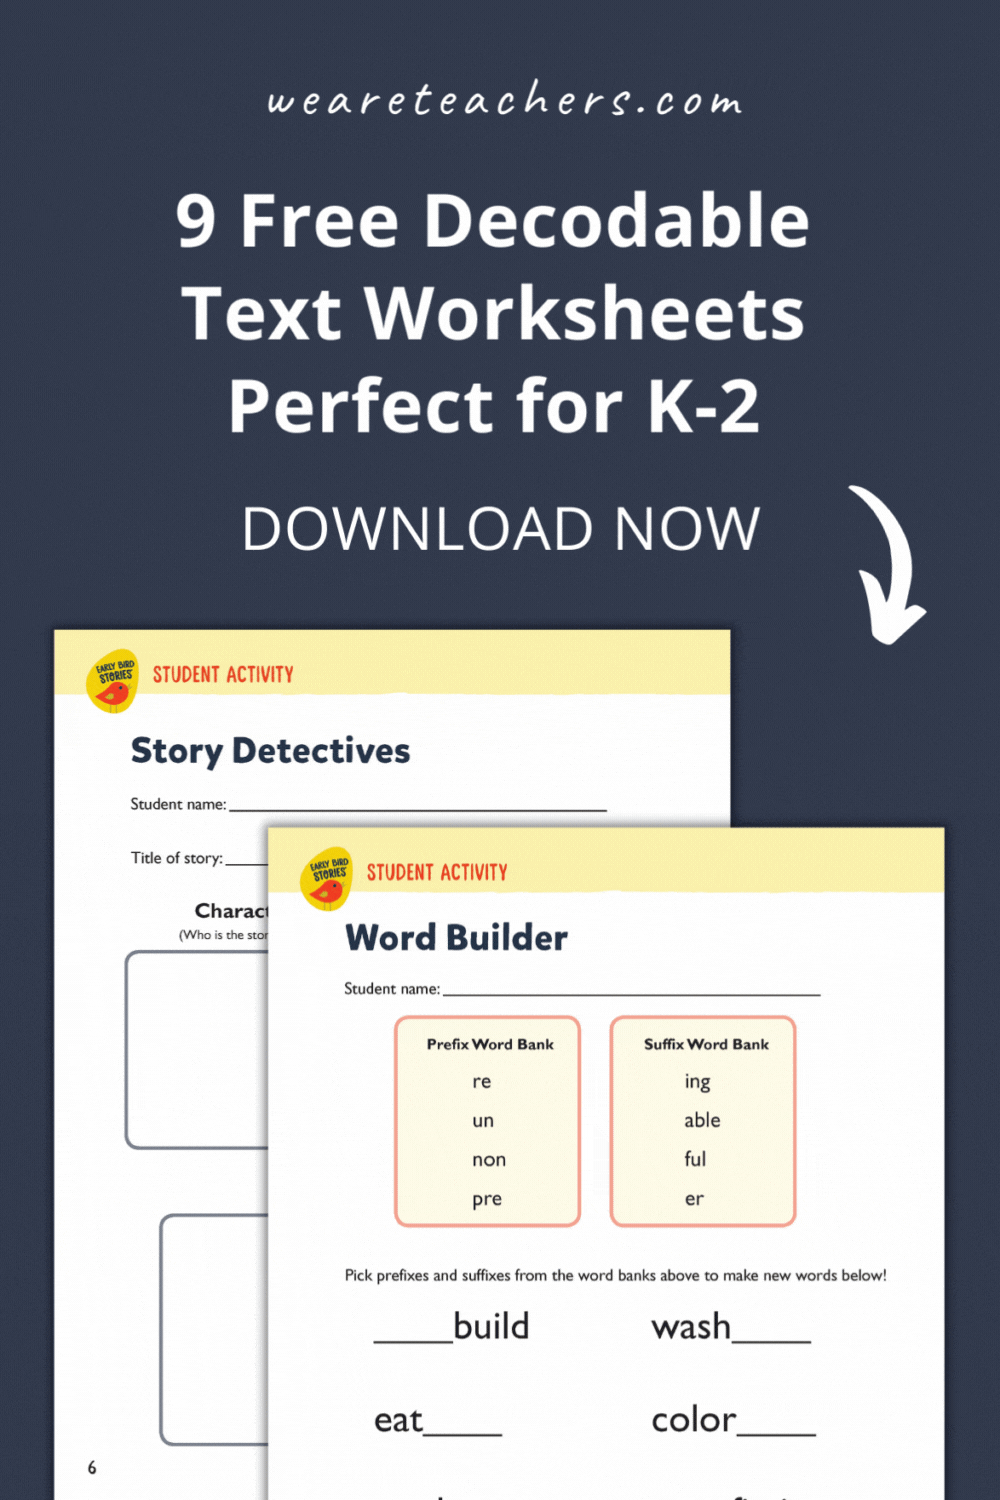 Teaching grades K-2? Don't miss these 9 FREE decodable worksheets that are ready-to-go for your classroom. Download now!